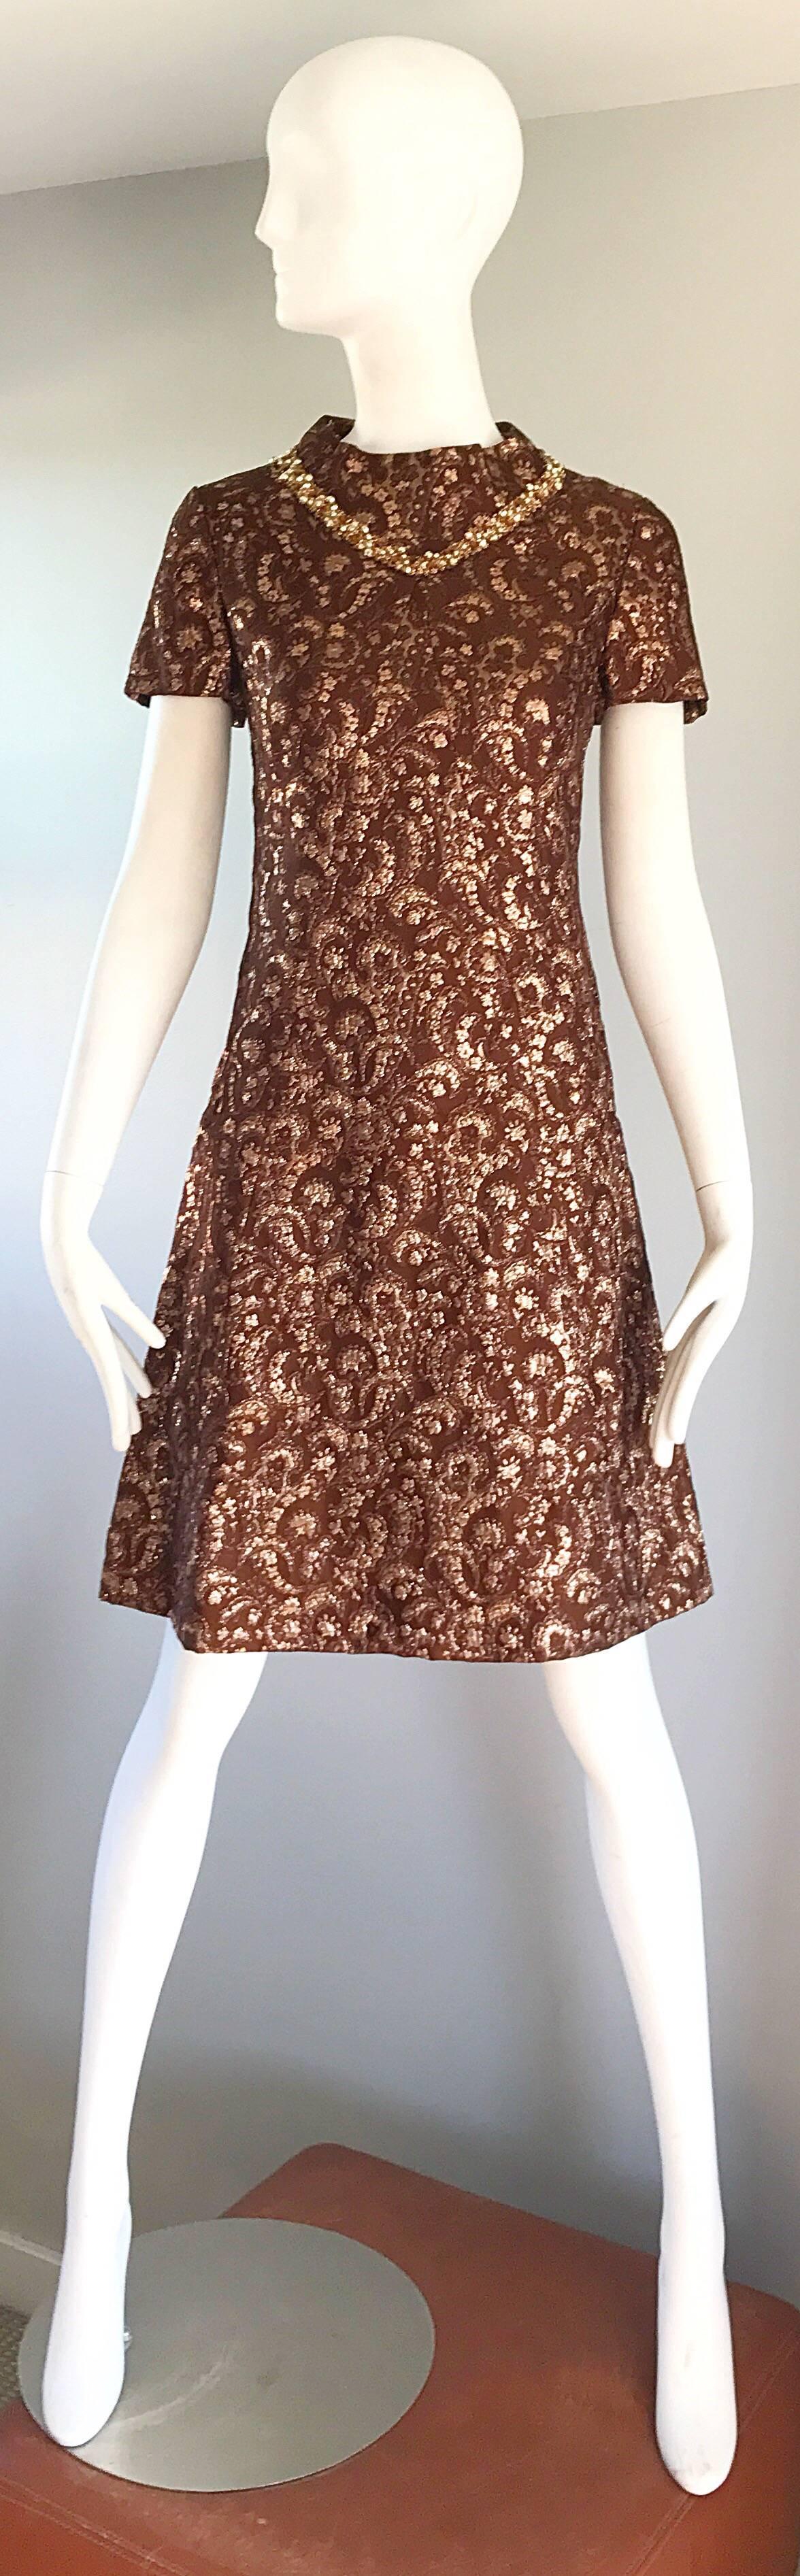 Chic 1960s ADELE SIMPSON brown and rose gold / copper metallic silk brocade A-Line dress! Features a smart tailored short sleeve bodice. Full and forgiving A-line skirt. Irredentist sequins and beads collar detail. Full metal zipper up the back with